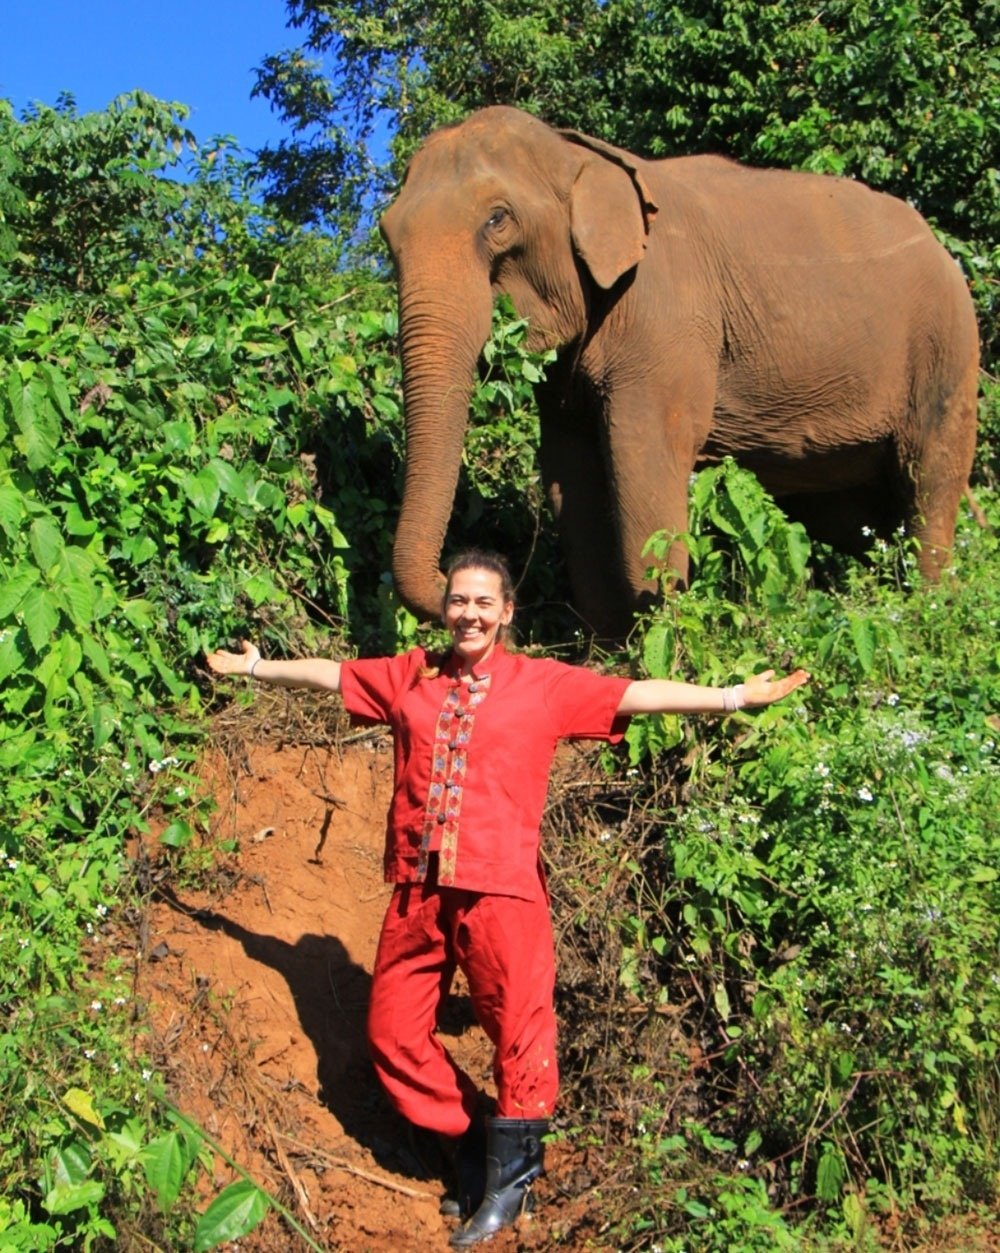 a woman in a red shirt stands next to an elephant